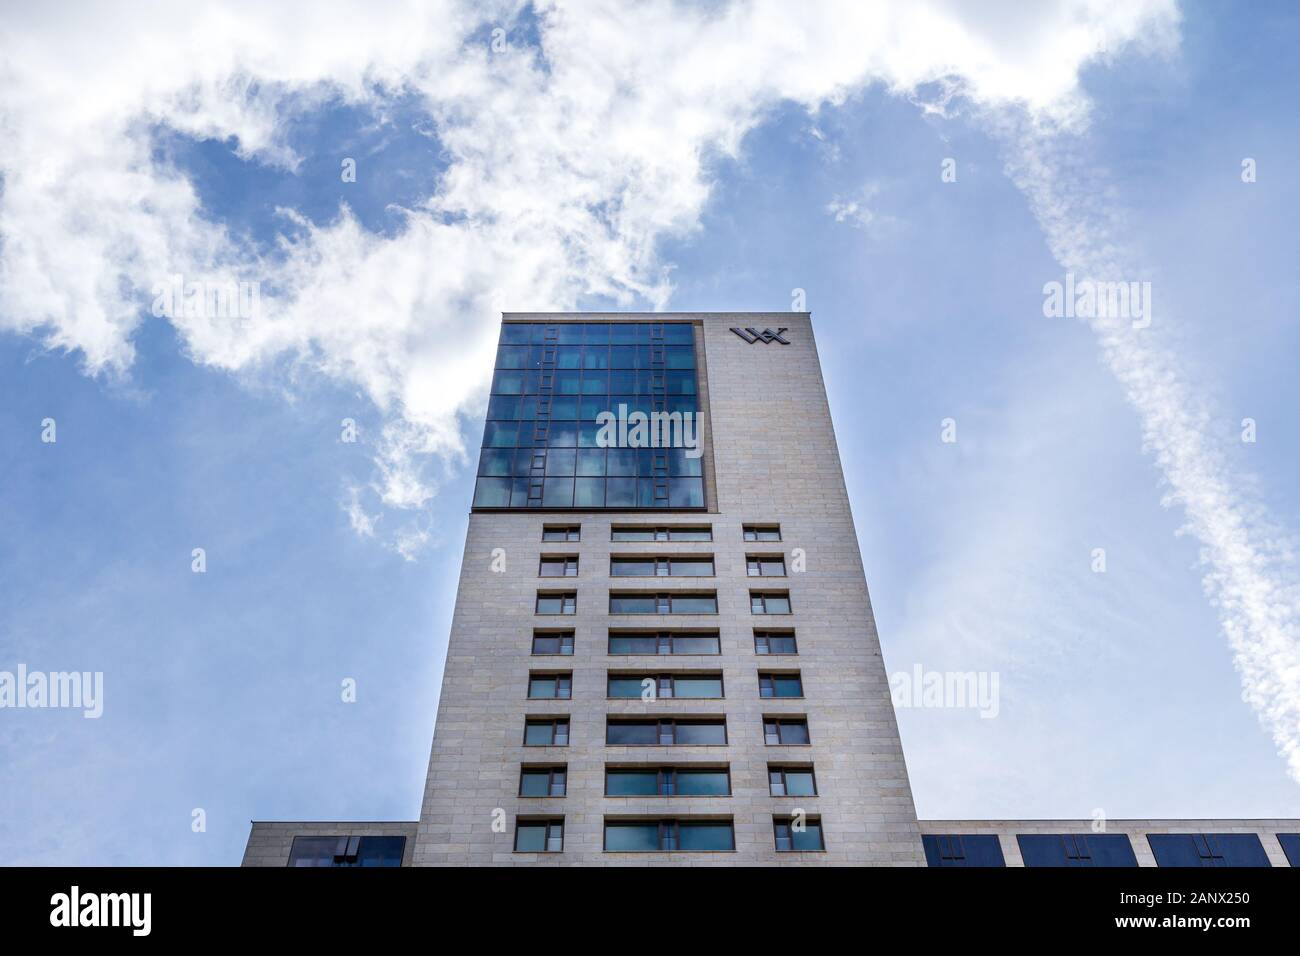 Berlin, Germany - May 30, 2019: The skyscraper Zoofenster is rising towards the blue sky. The emblem of Waldorf Astoria is mounted on the facade as it Stock Photo